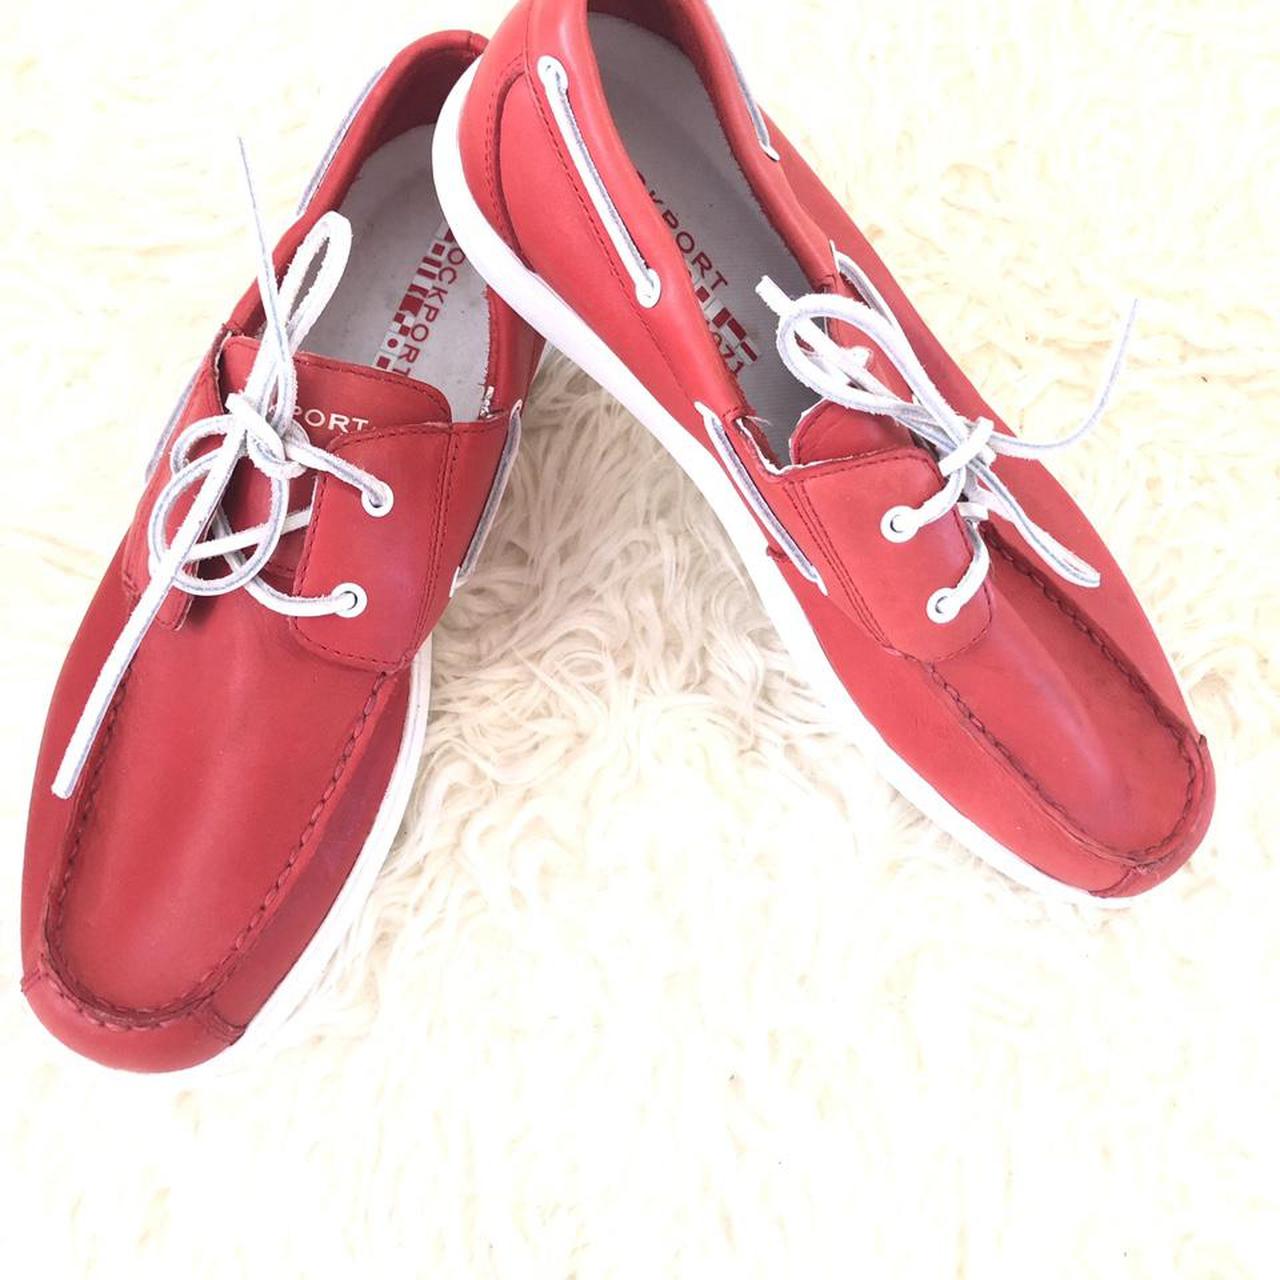 Rockport Men's Red and White Loafers (2)